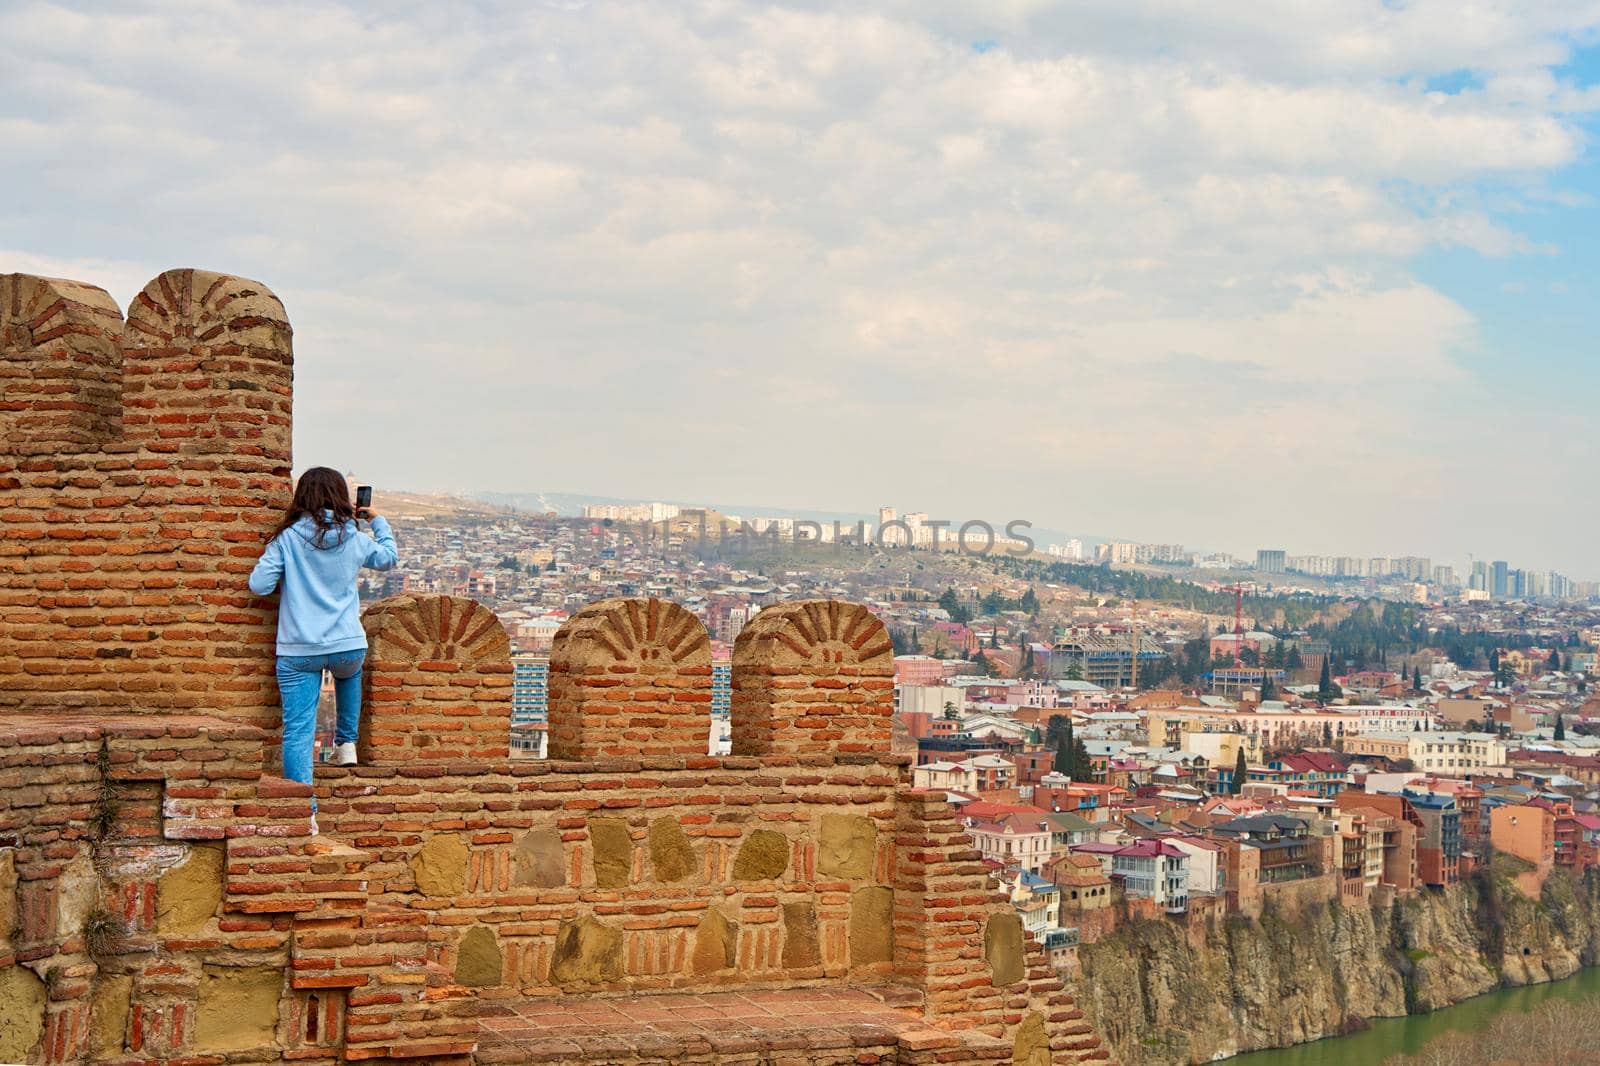 The girl enjoys the view and the silence while sitting on the wall of an ancient fortress overlooking the city.